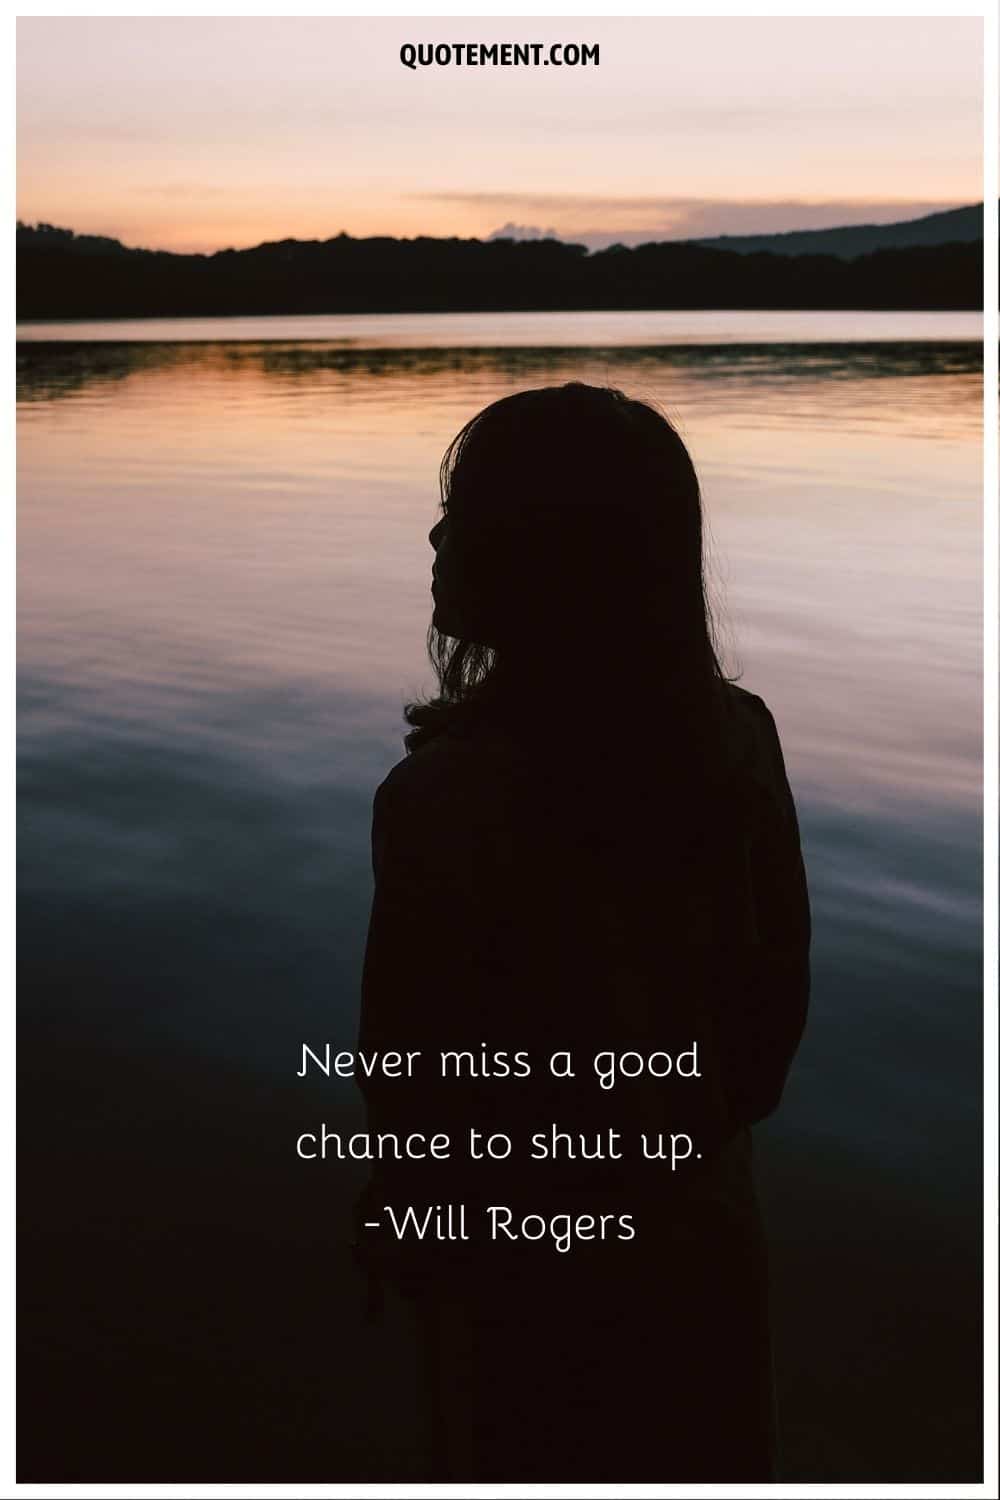 “Never miss a good chance to shut up.” ― Will Rogers